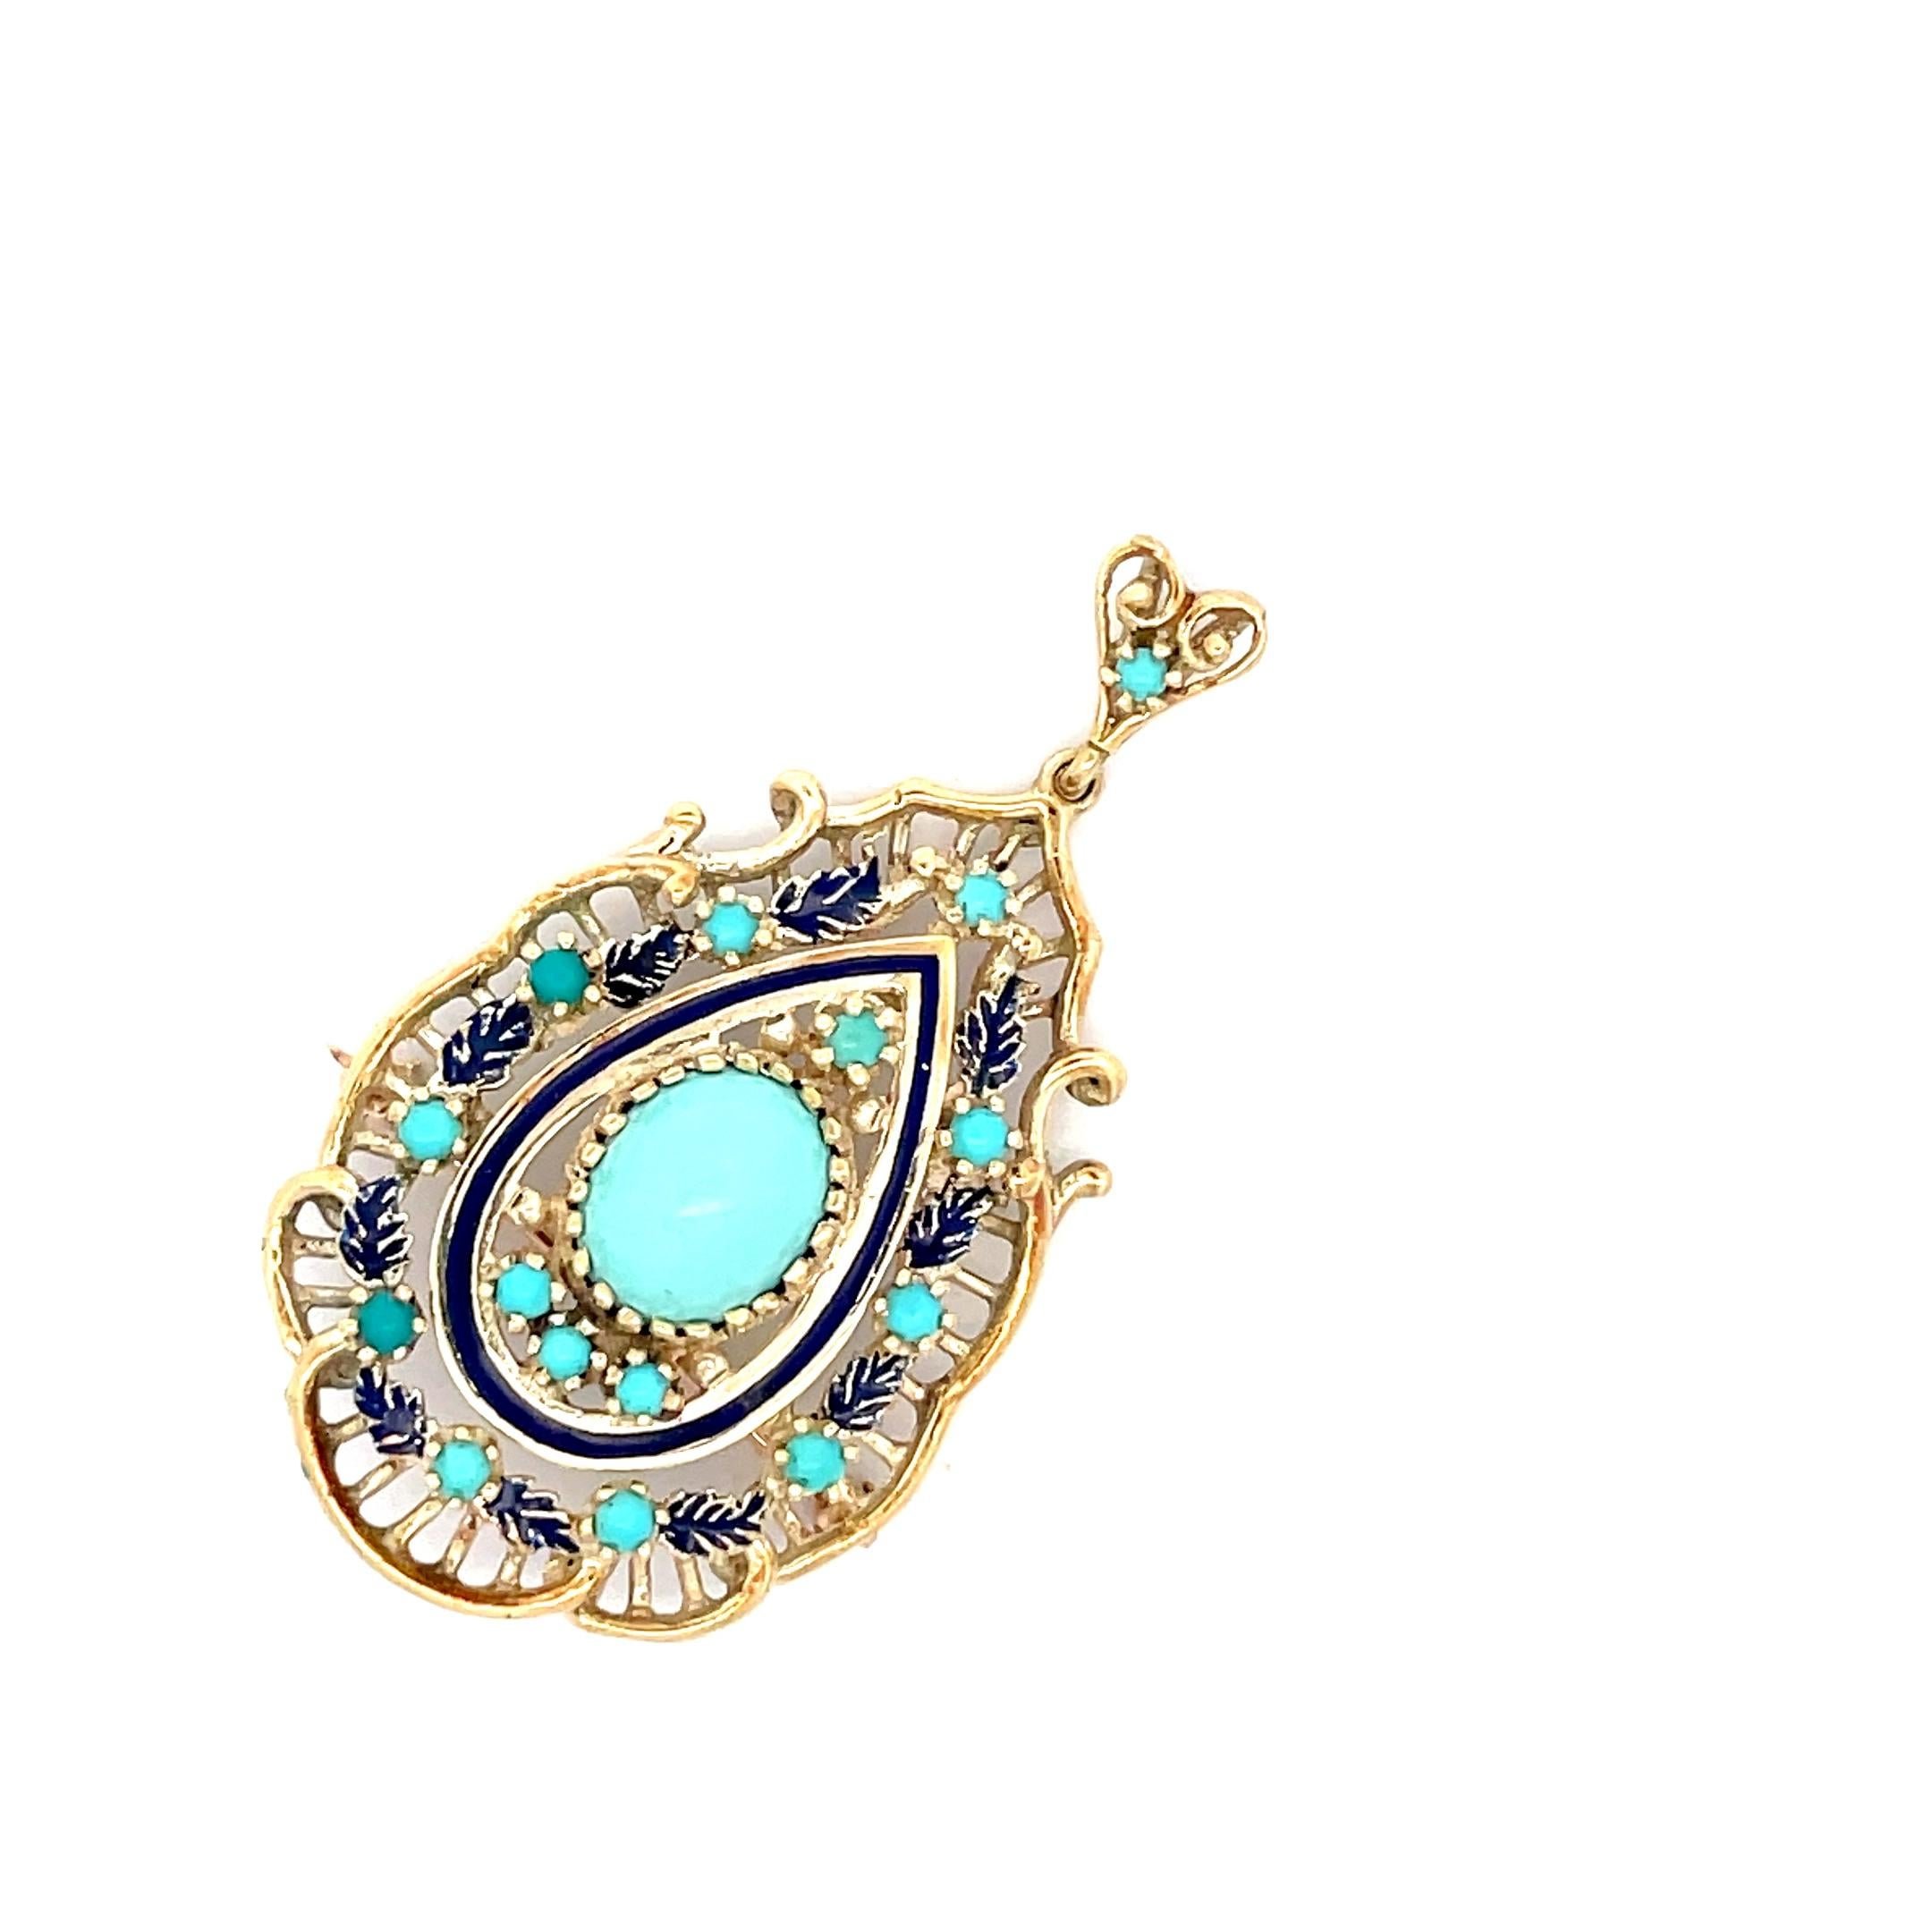 1950s Retro 14K Yellow Gold Blue Enamel and Turquoise Pendant/Pin  In Excellent Condition For Sale In Lexington, KY